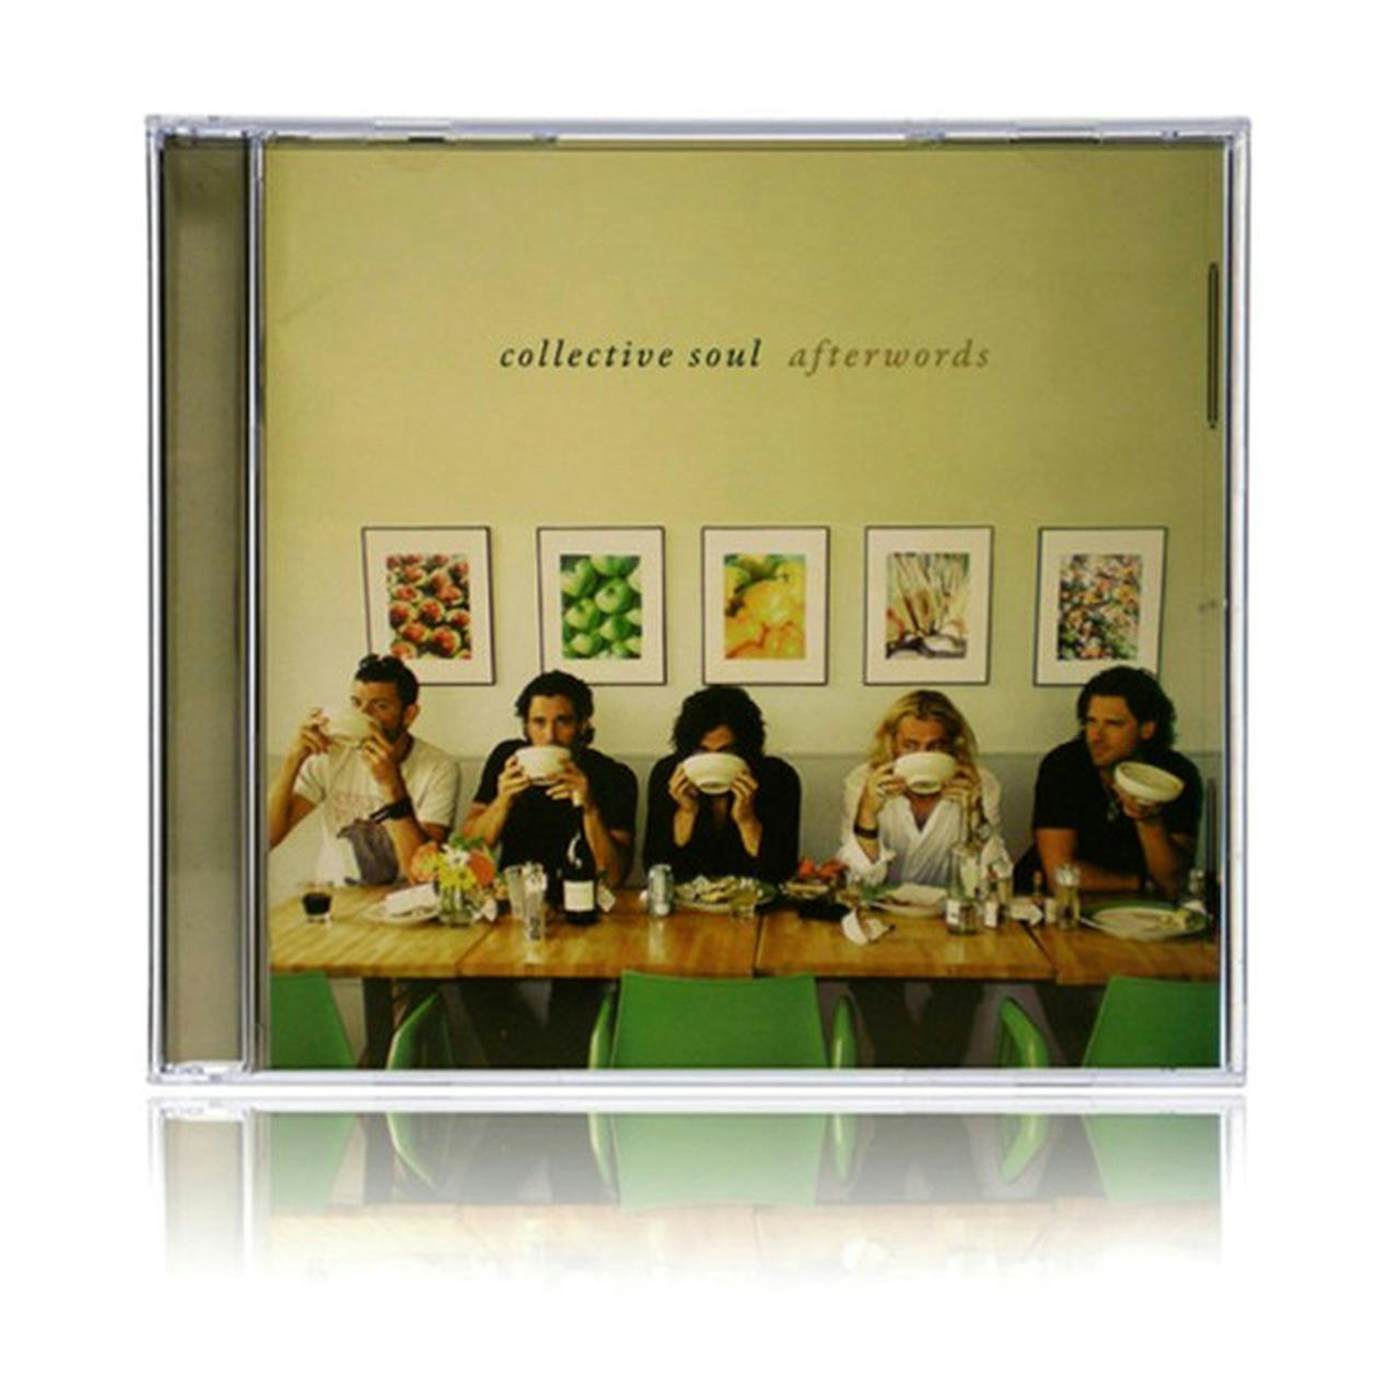 Collective Soul "Afterwords" CD